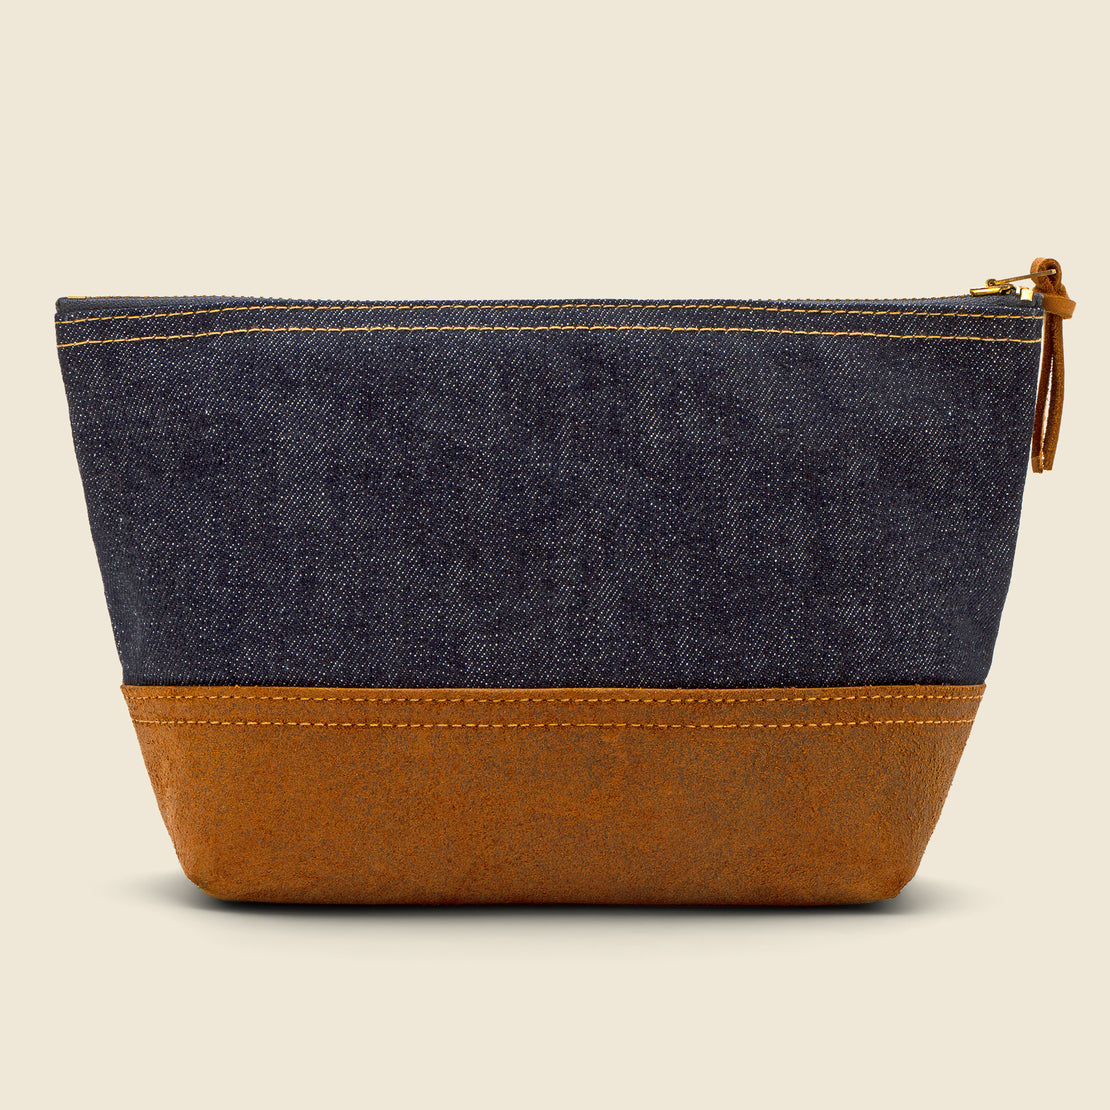 Large Gusset Pouch - Indigo/Brown Suede - RRL - STAG Provisions - Accessories - Bags / Luggage